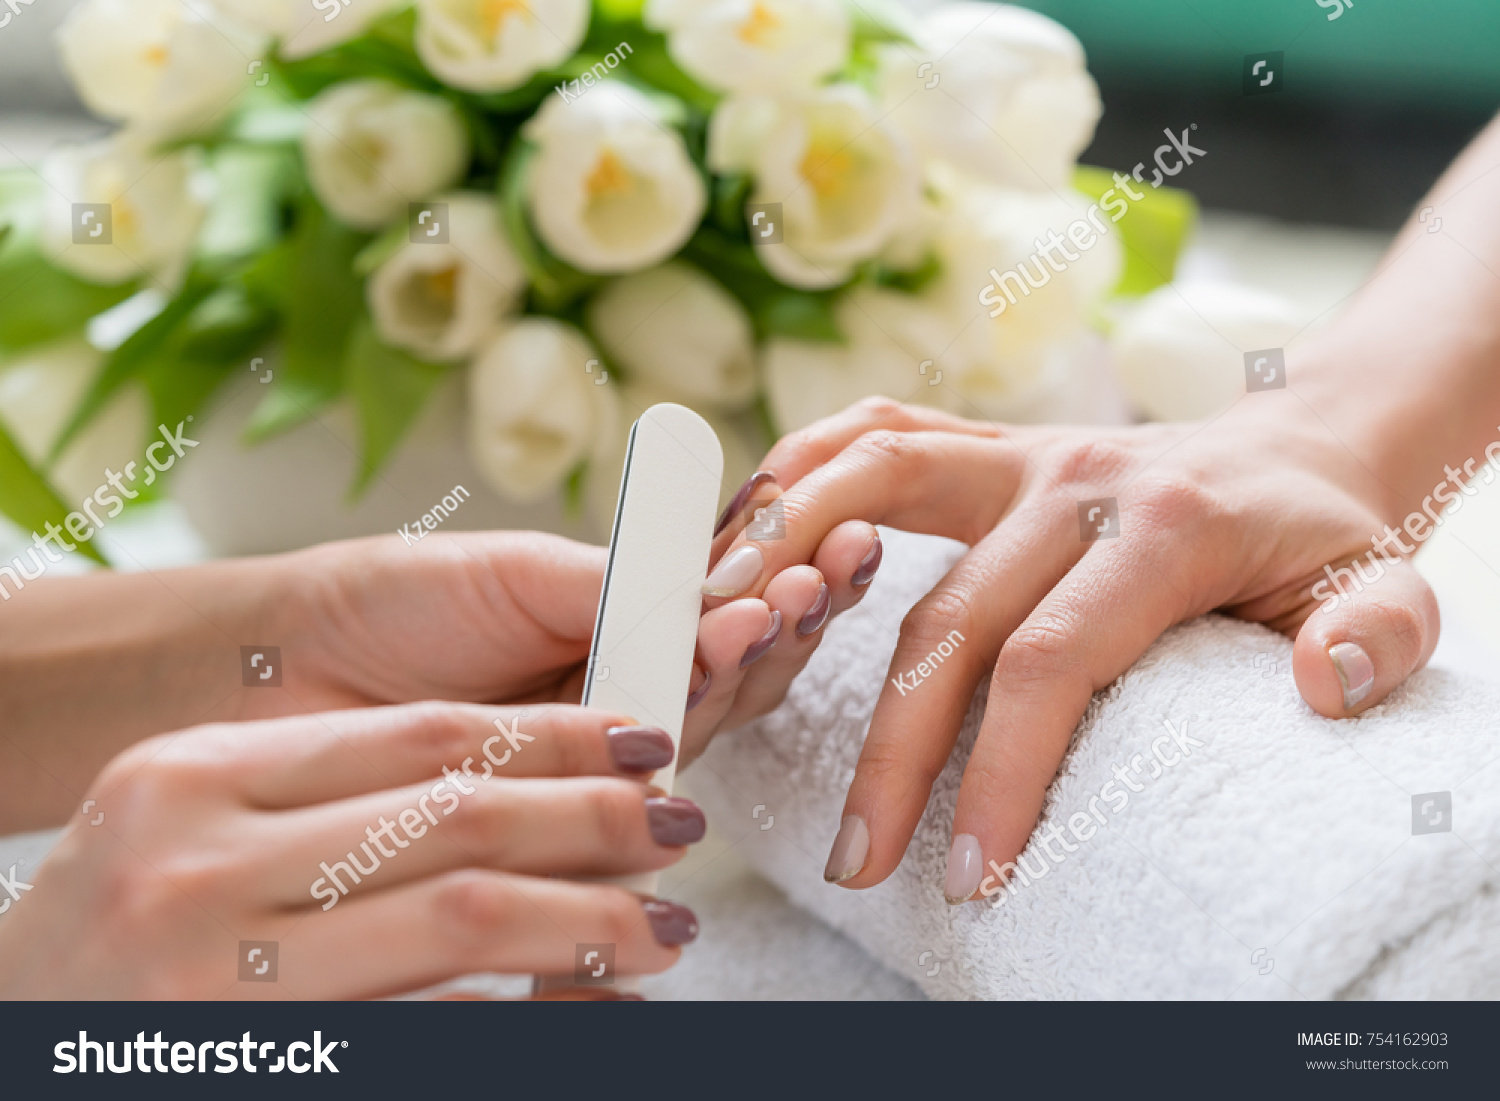 Close-up of the hands of a qualified manicurist filing the nails of a young woman with a white buffer in a trendy nail salon #754162903